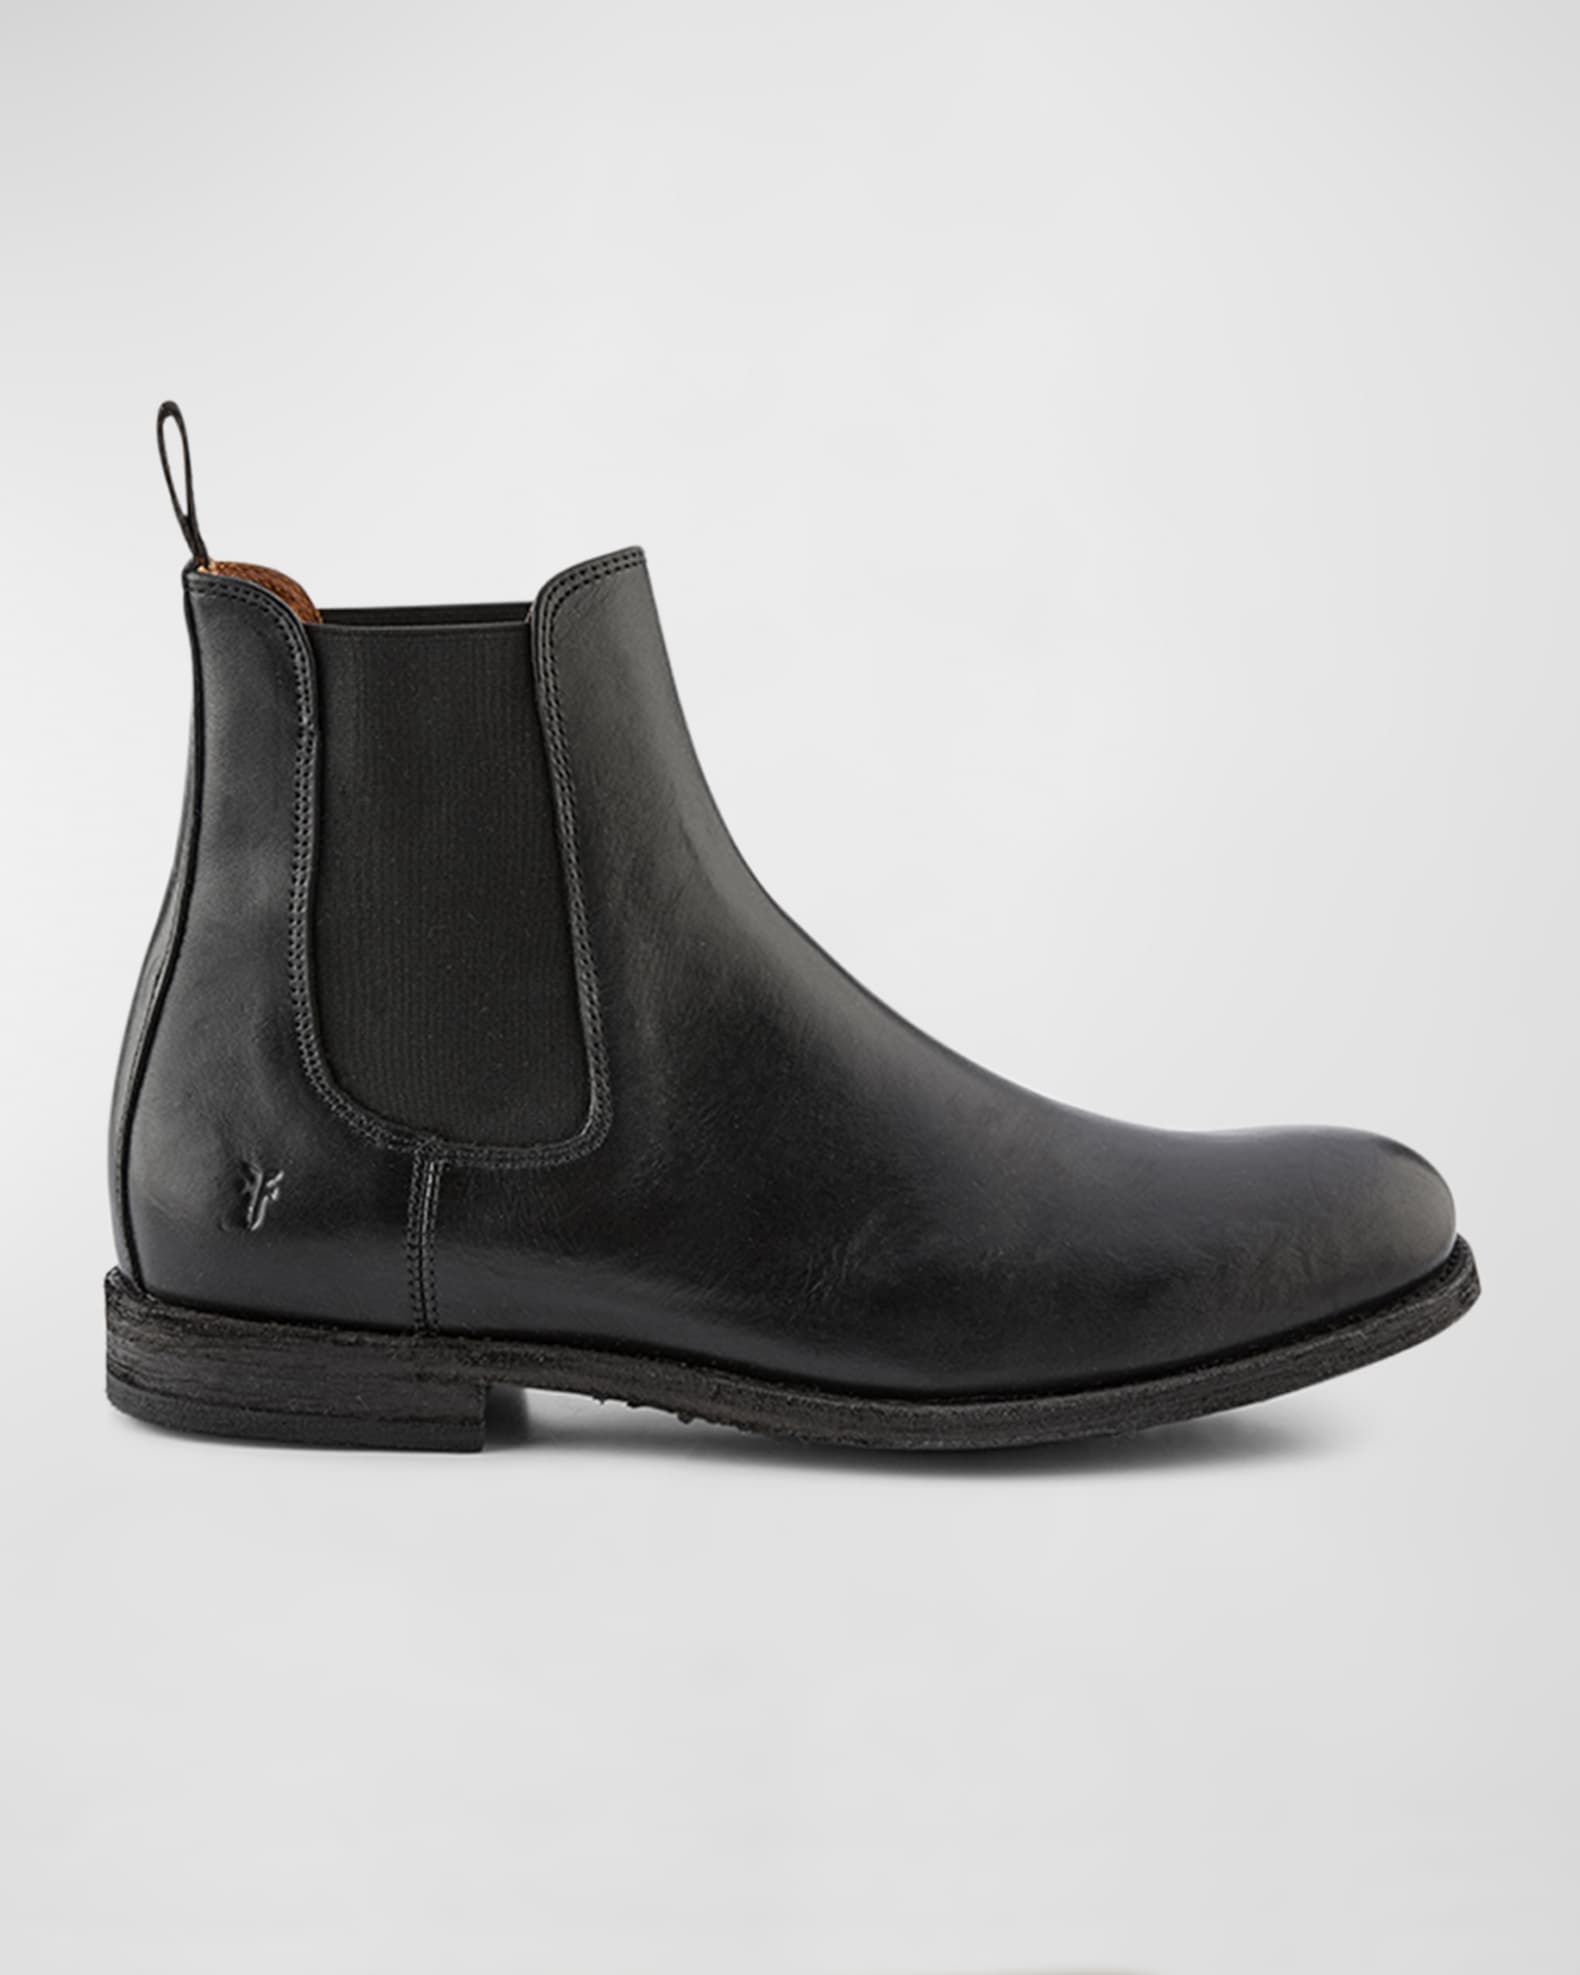 These Iconic Chelsea Boots Are Now 20% Off